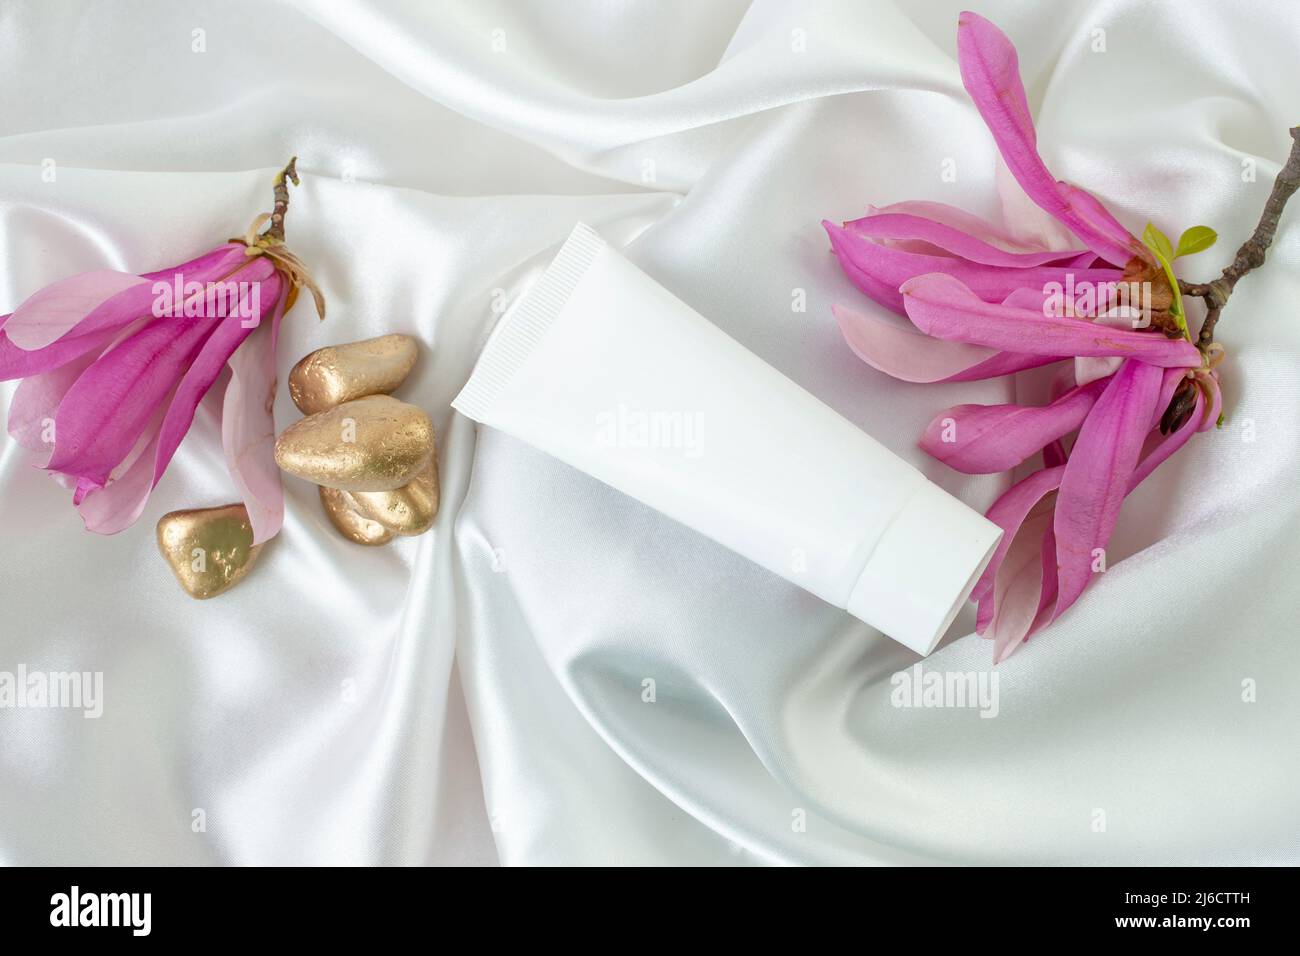 Cosmetic product photography backdrop, with magnolia flowers on white satin fabric background Stock Photo